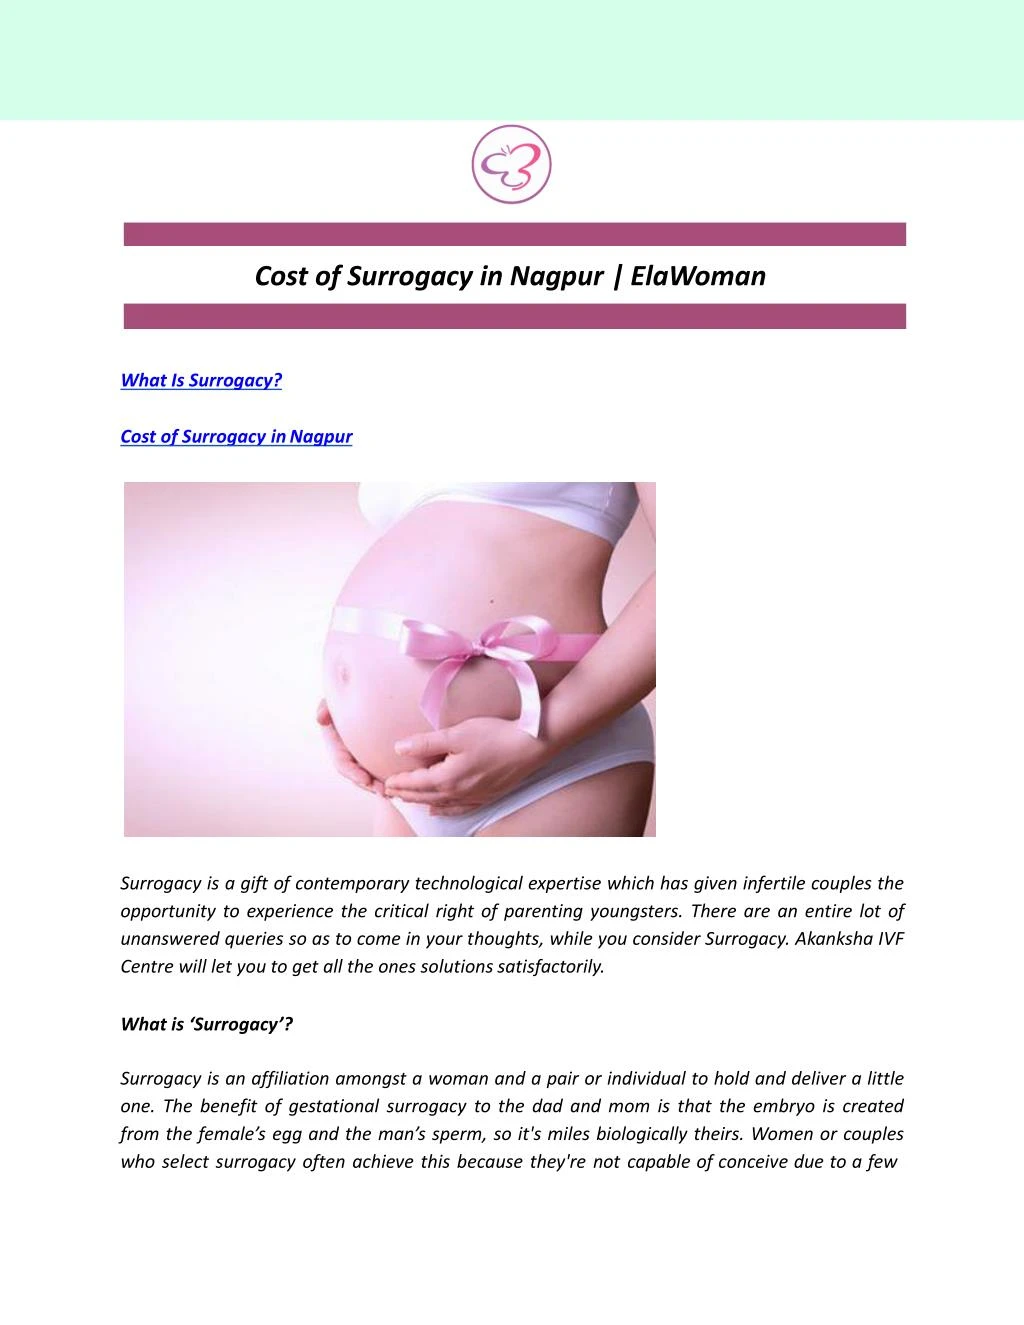 cost of surrogacy in nagpur elawoman